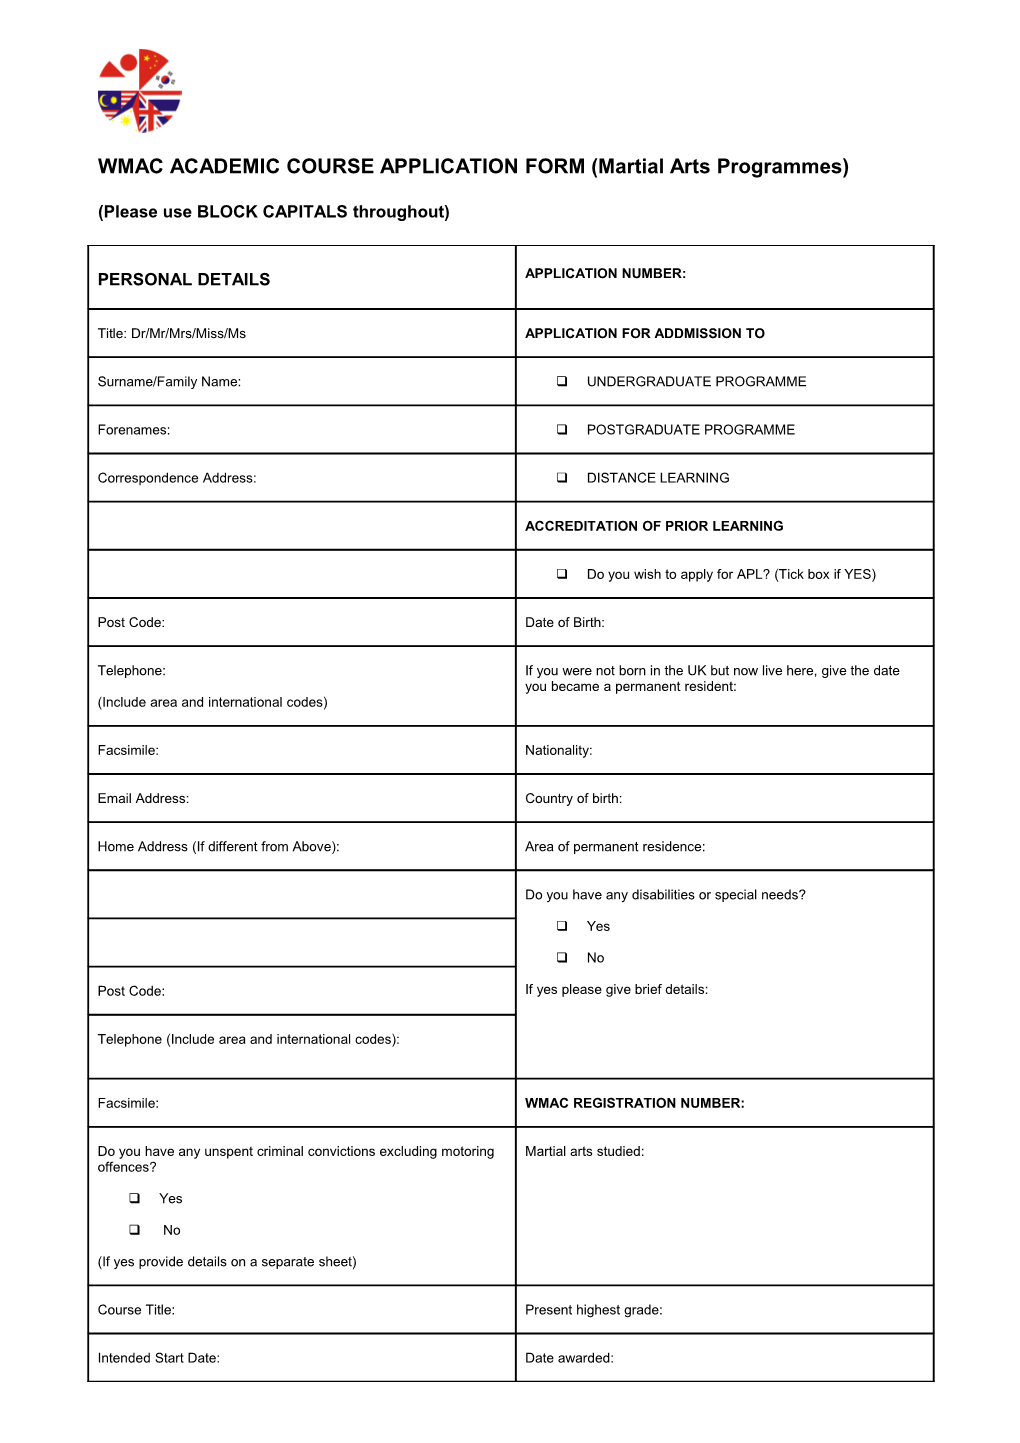 University of Derby Application Form